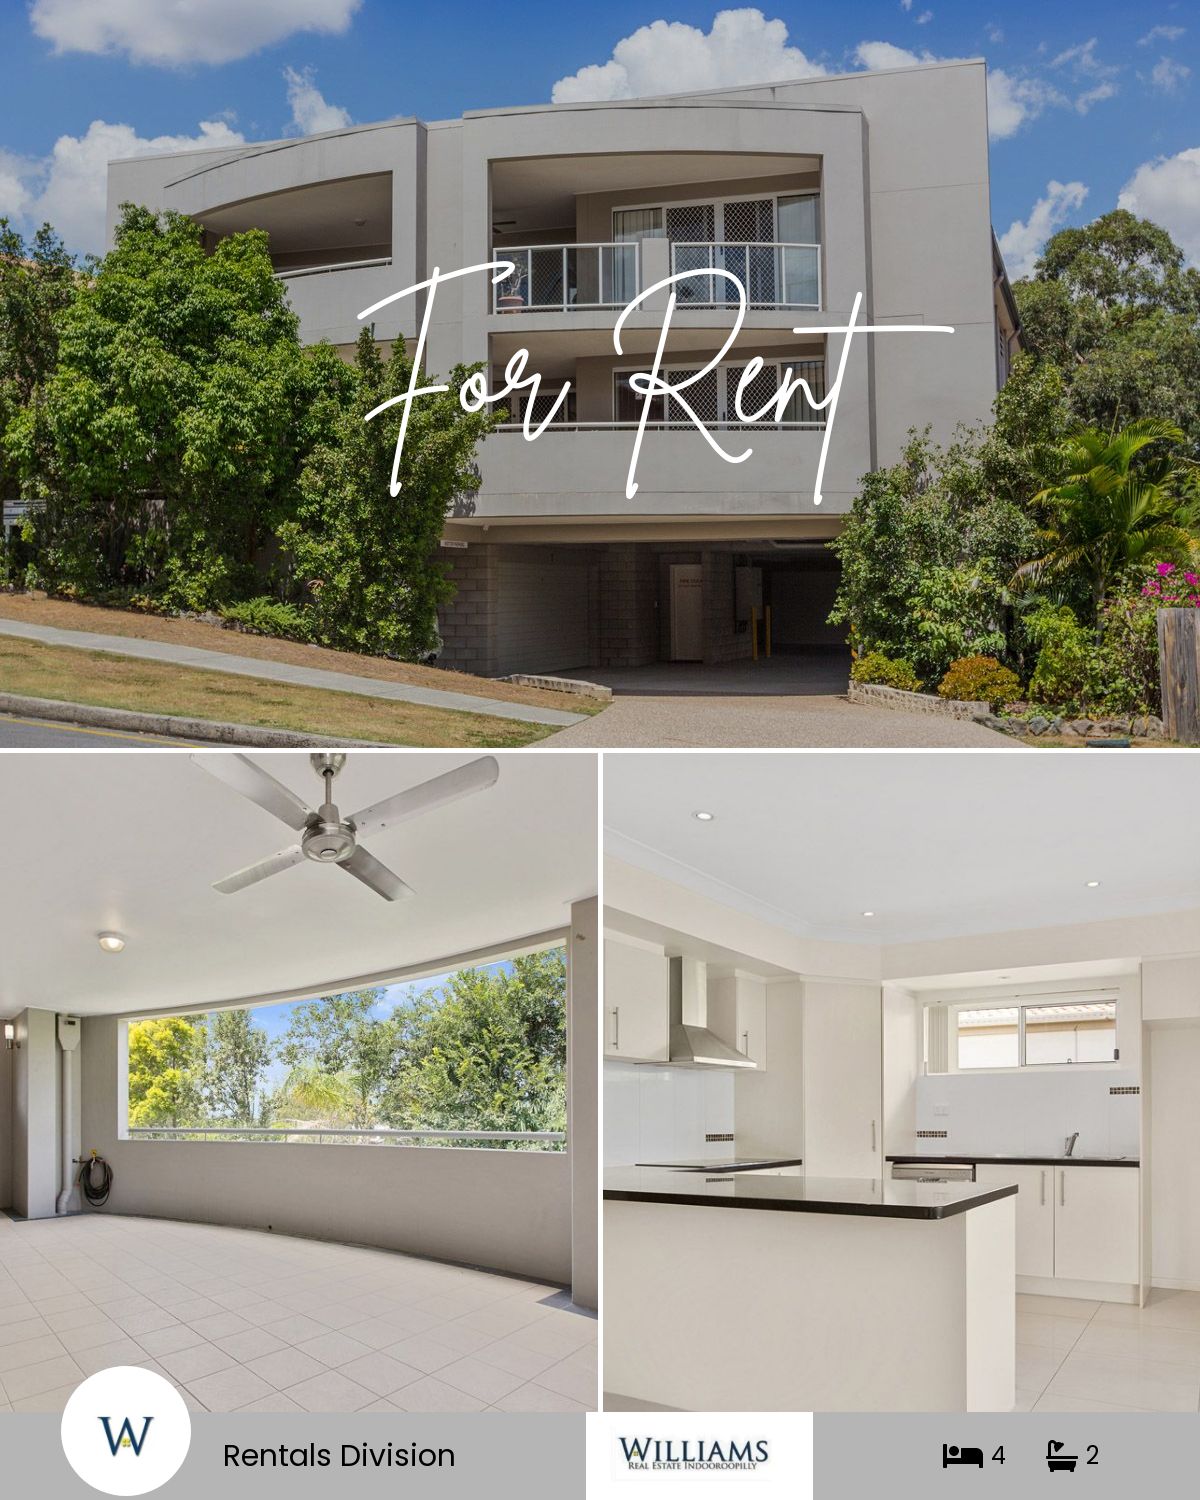 1/14-16 Finney Road, Indooroopilly, QLD 4068 | Realty.com.au